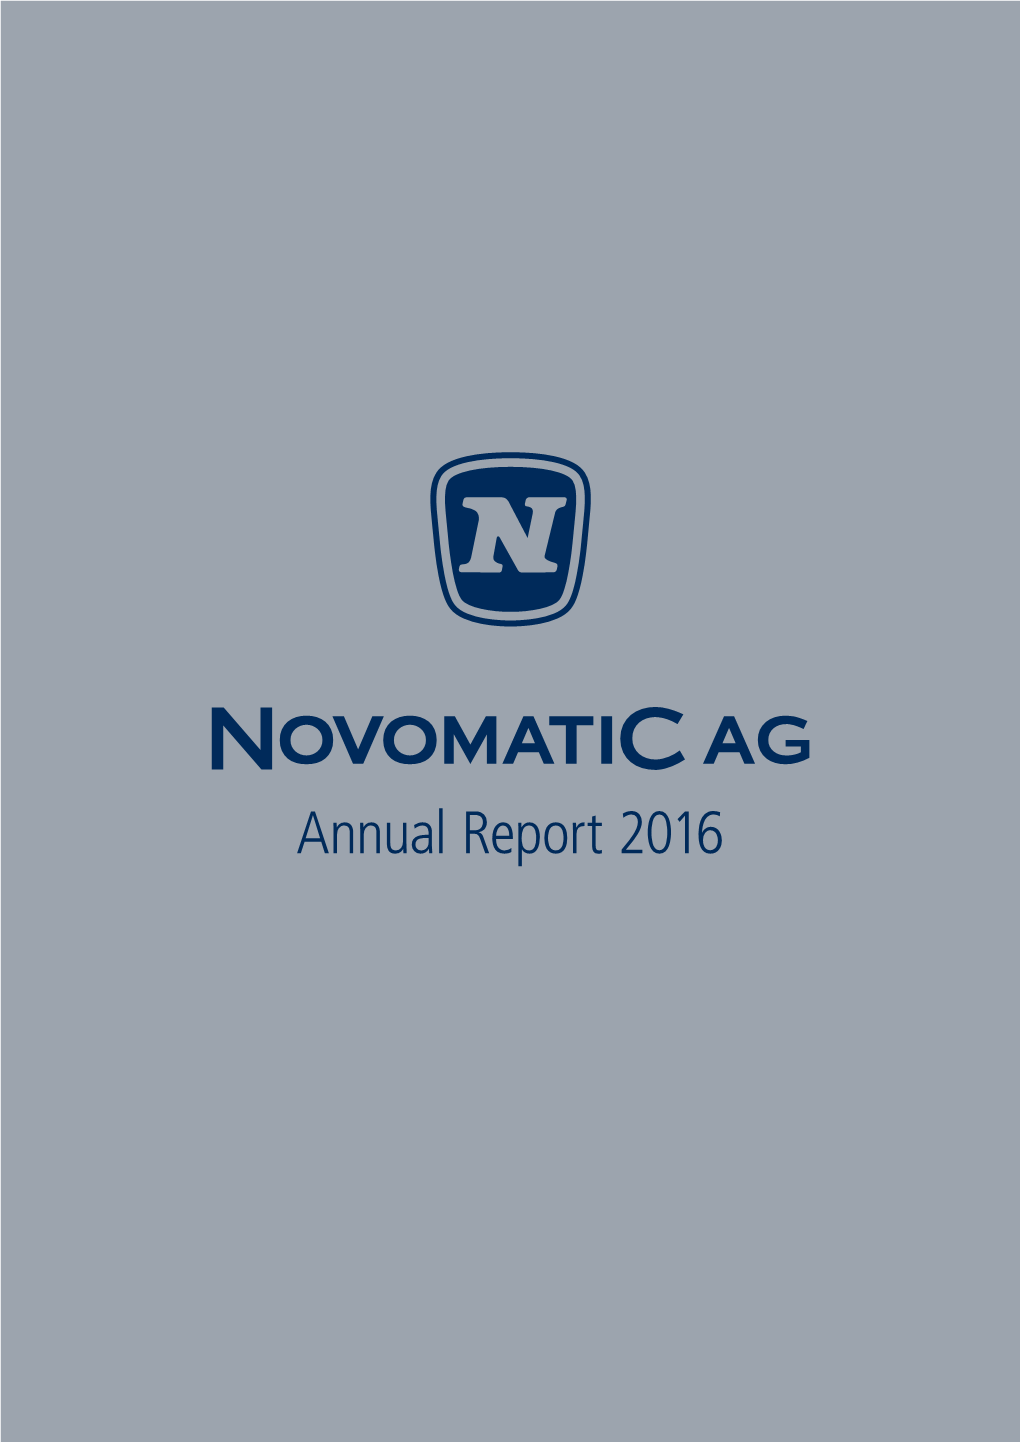 Annual Report 2016 Overview of Key Figures